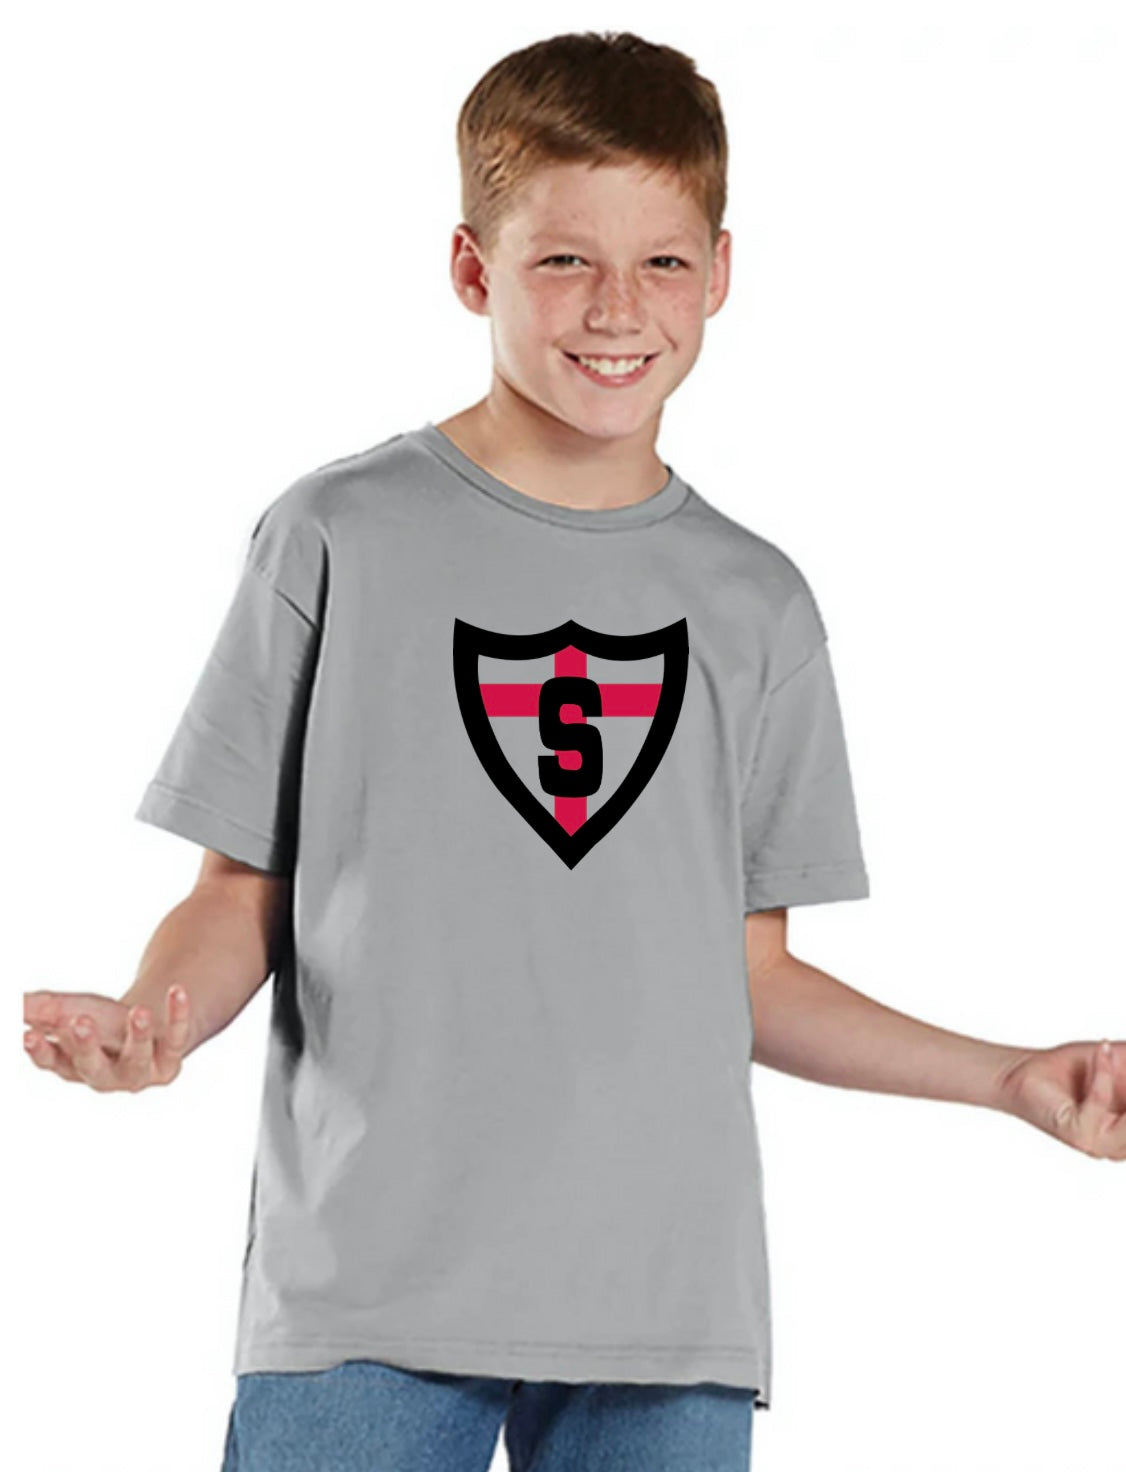 Shanley Youth Dry Fit Tee